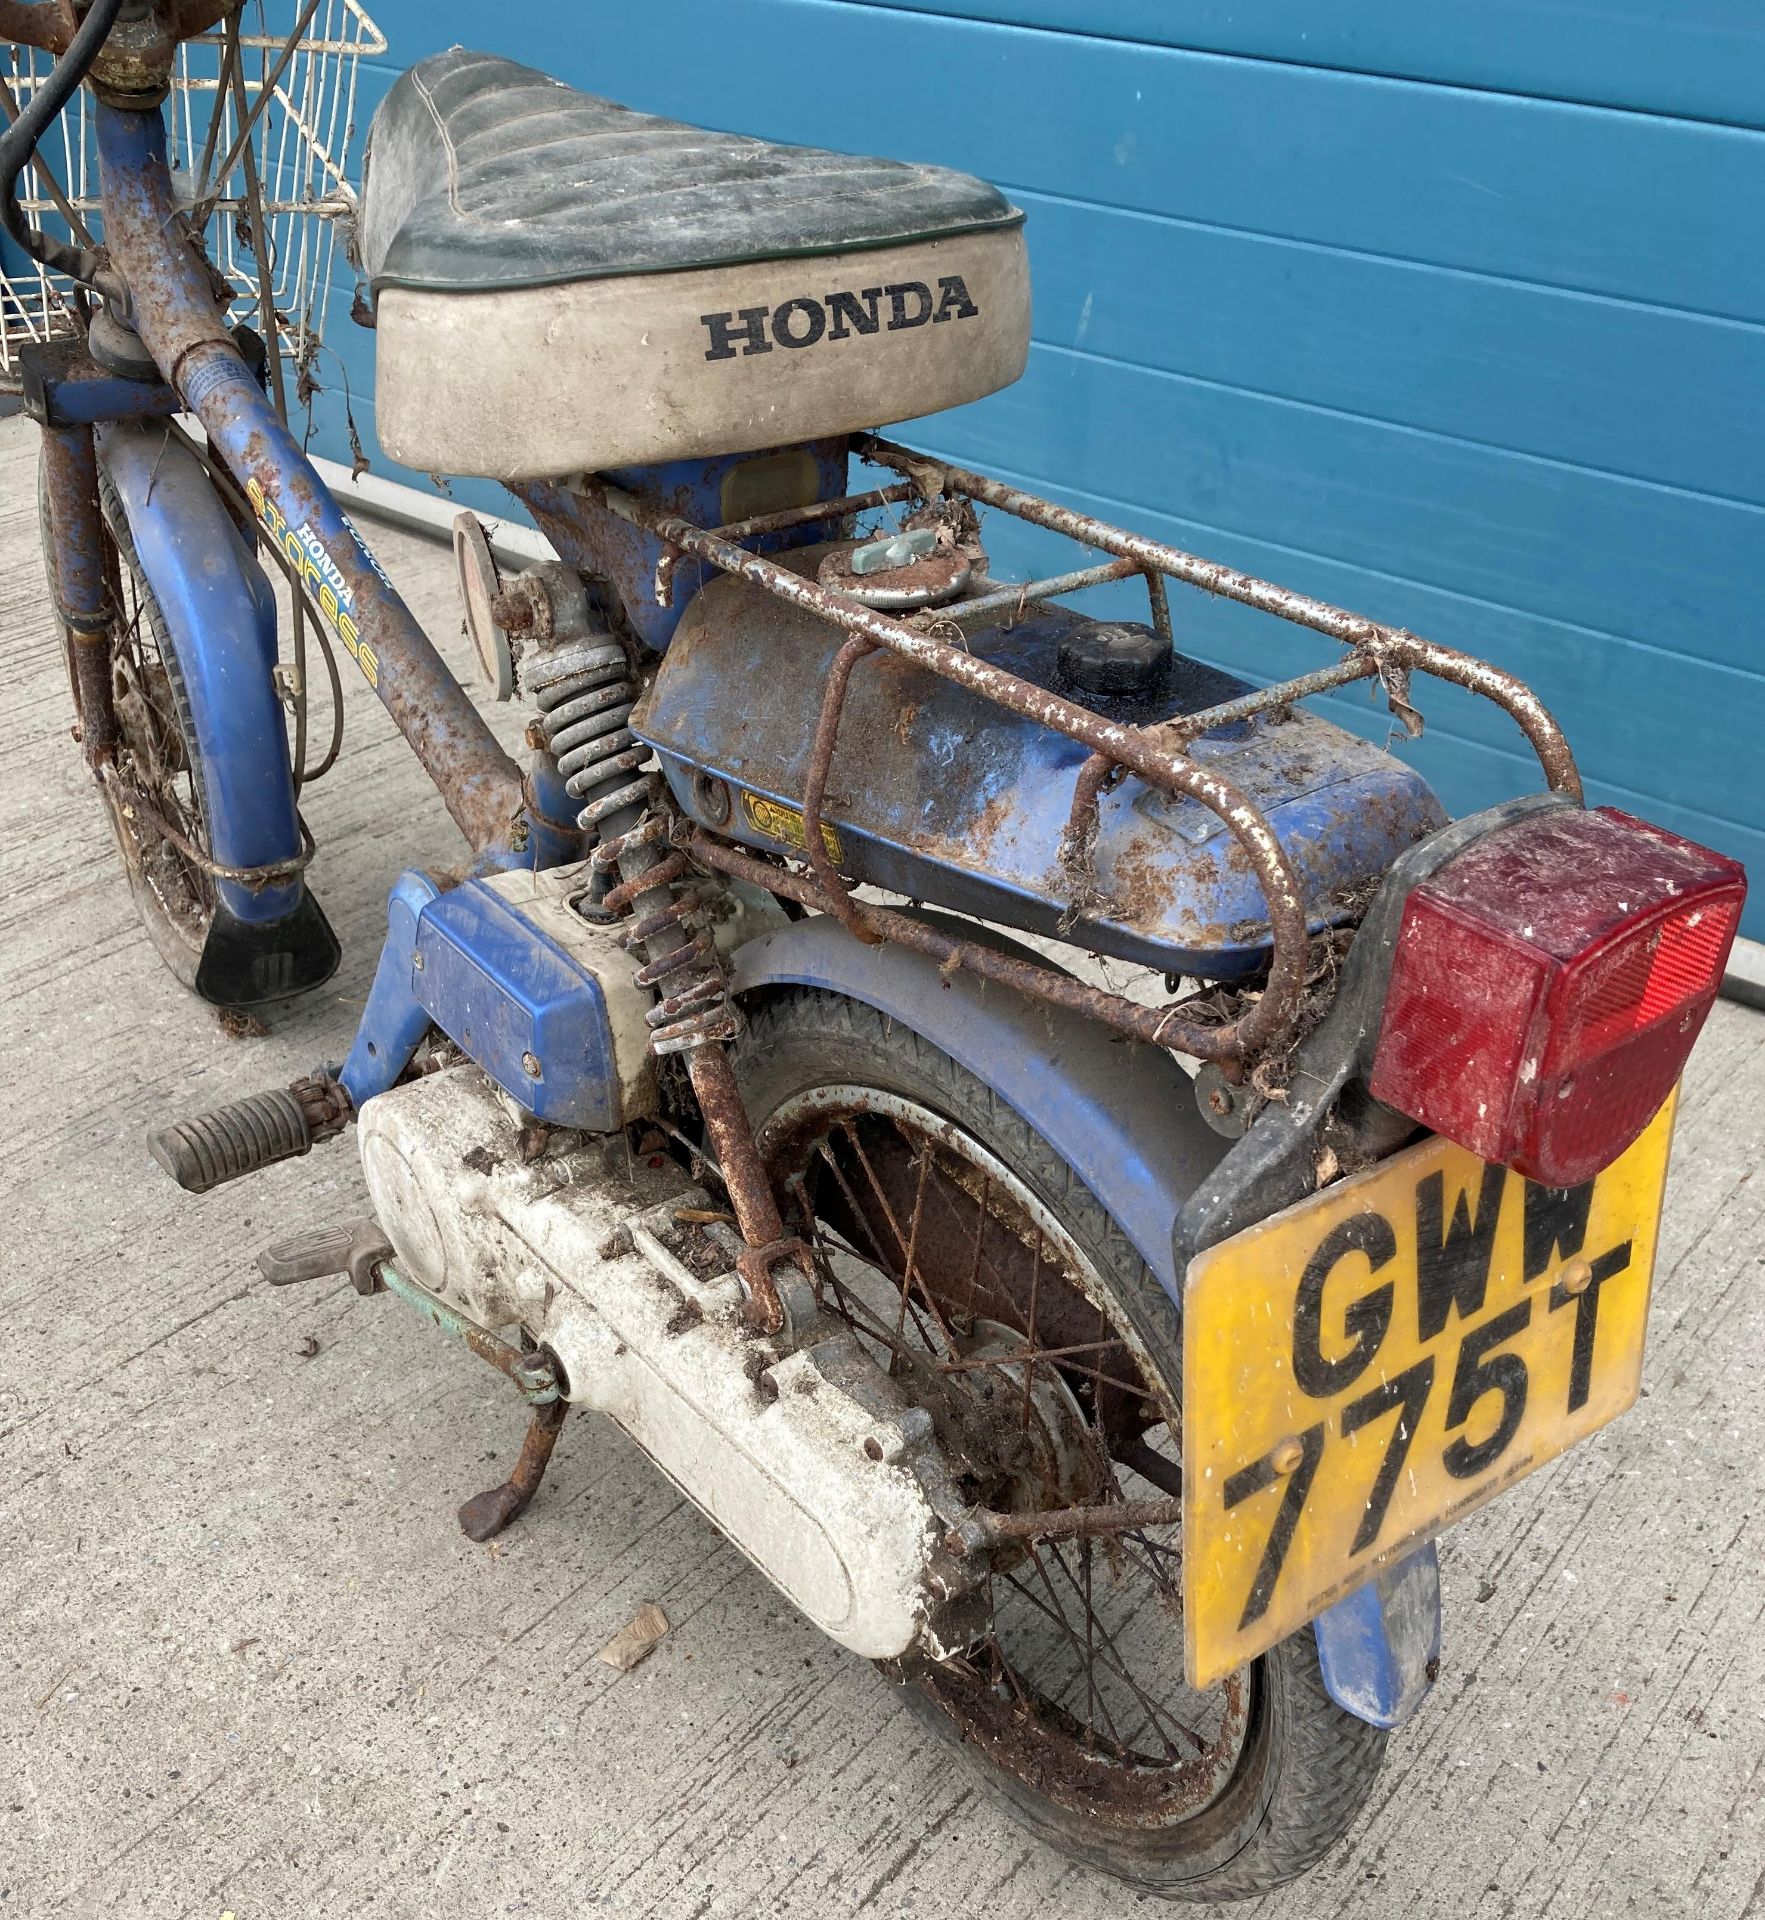 HONDA EXPRESS 49cc MOPED - Petrol - Blue. BARN FIND - From a deceased estate. Reg No: GWW 775T. - Image 8 of 10